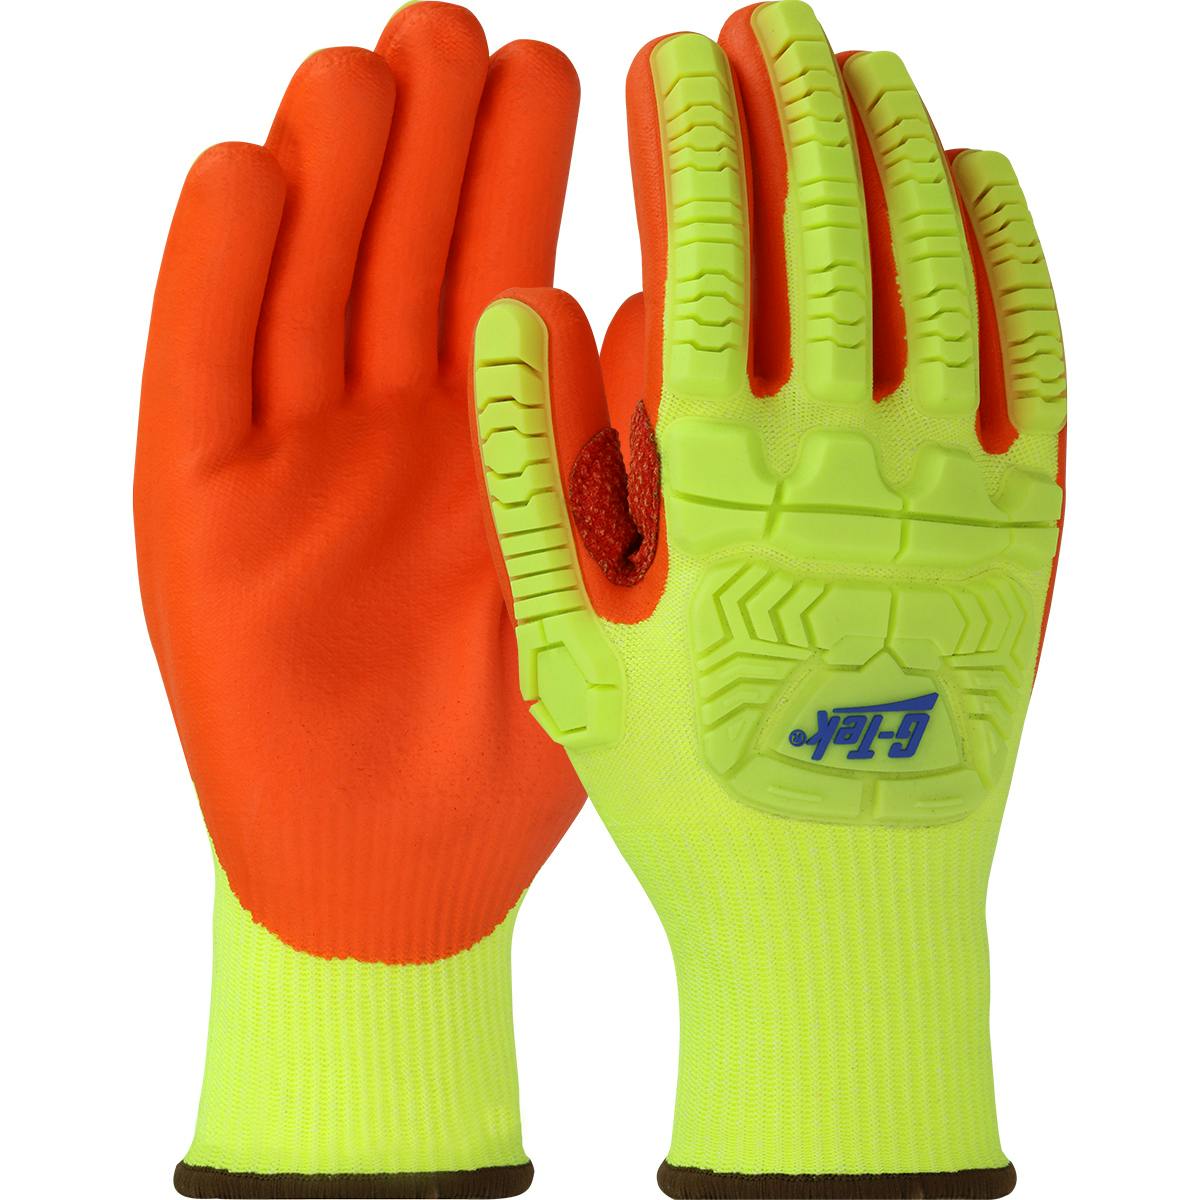 G-Tek® PolyKor® Seamless Knit Polykor Blended Glove with Hi-Vis Impact Protection and Nitrile Foam Coated Palm & Fingers (HVY710HSNFB)